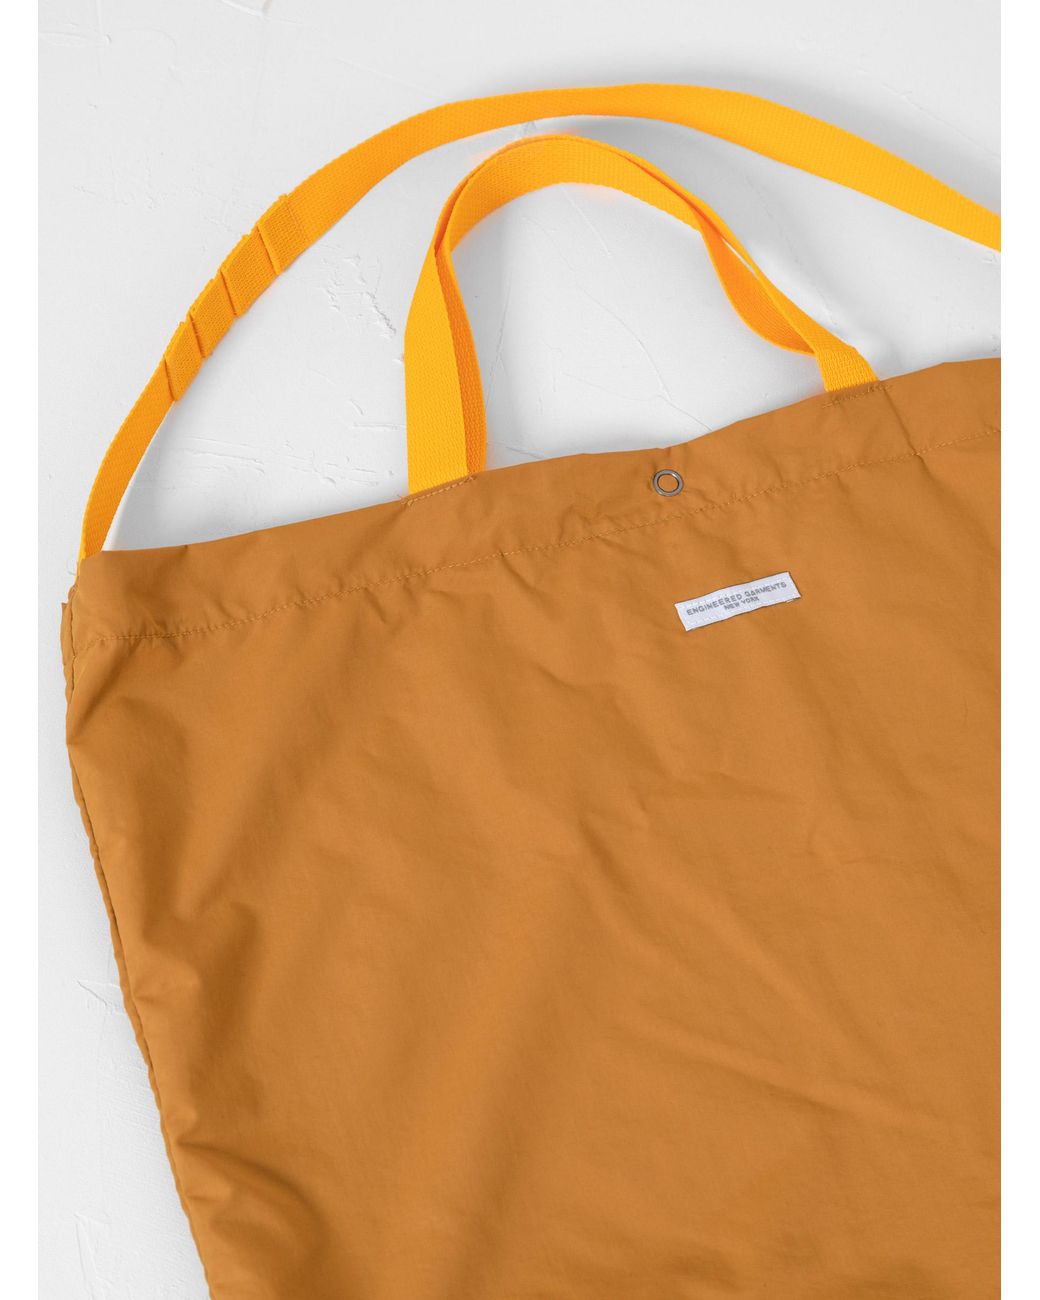 Engineered Garments Men's Carry All Tote Mustard